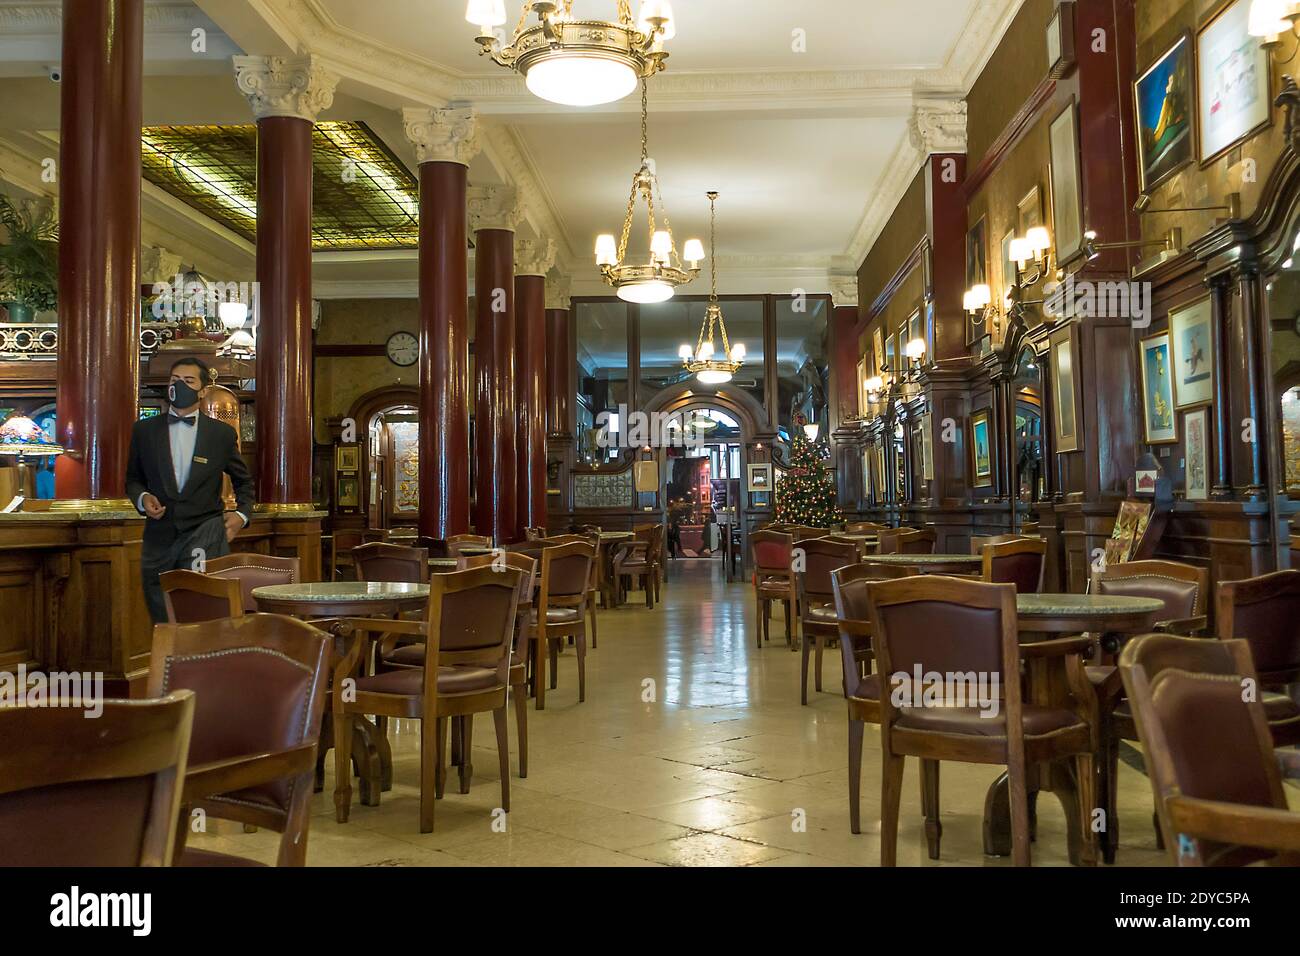 A waiter with face mask in the iconic Cafe Tortoni, Buenos Aires, Argentina during the Covid-19 pandemic Stock Photo